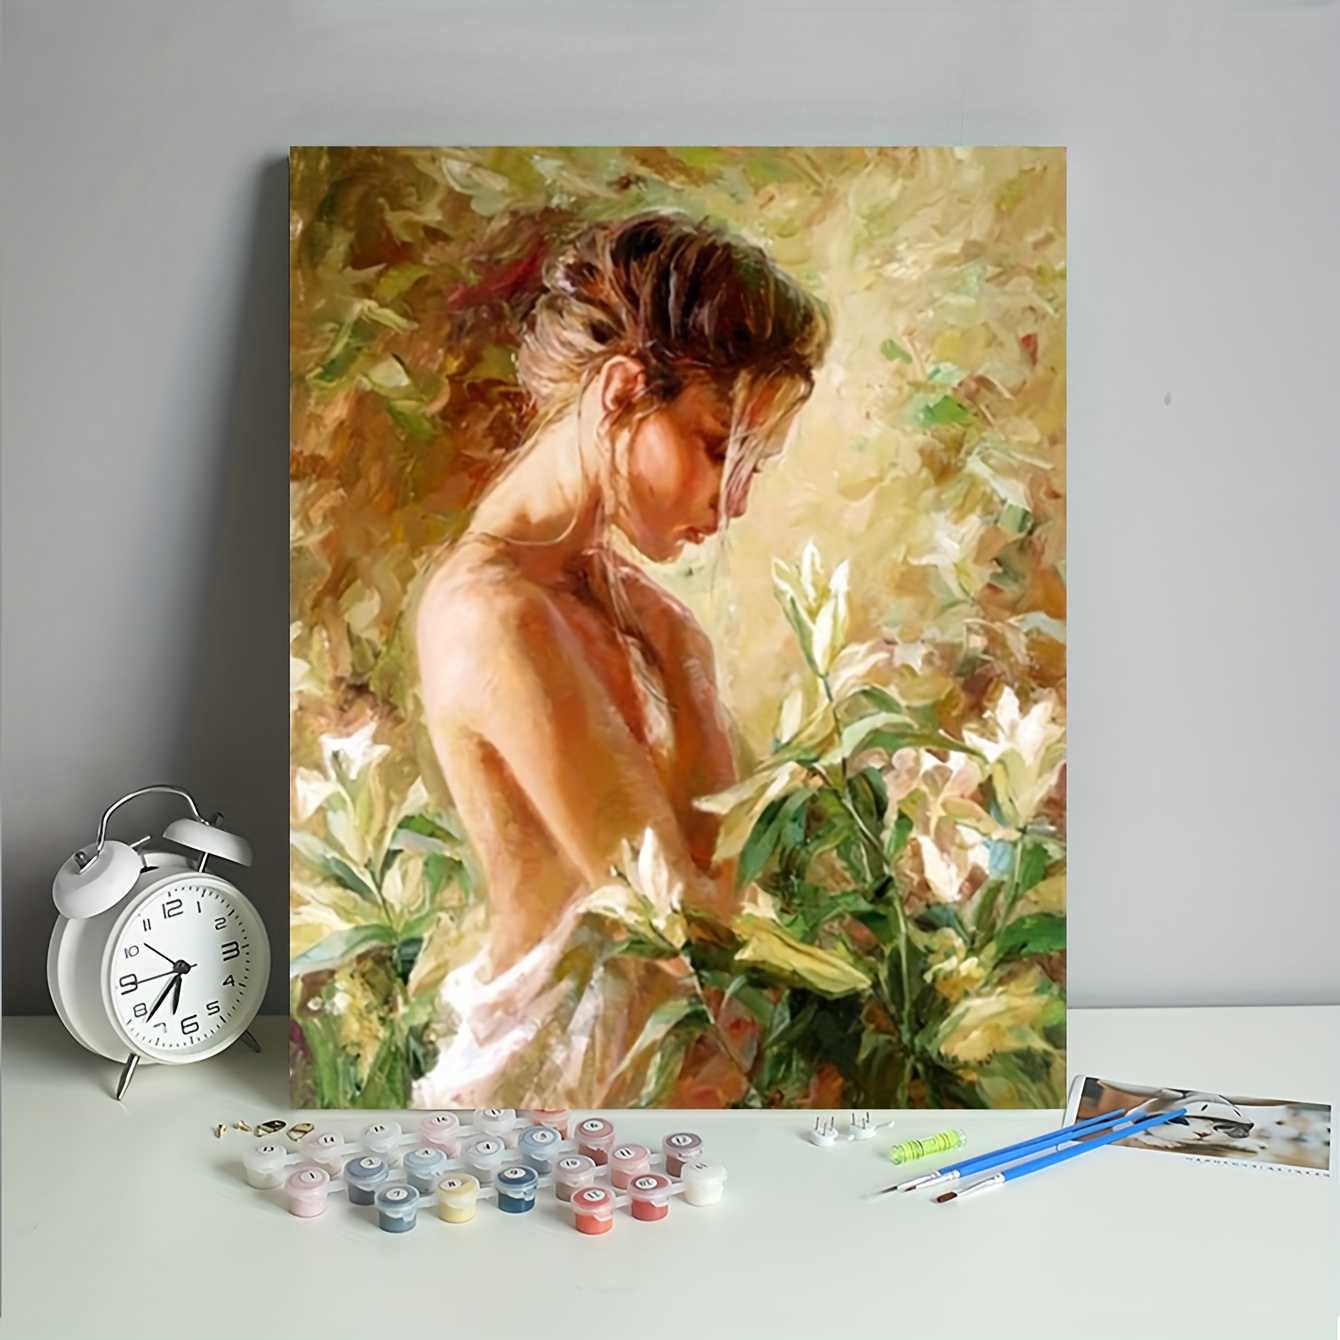 

1pc Diy Paint By Numbers Kit For Adults, "charming Woman" Themed Canvas Painting, 16x20 Inches, Acrylic Paints, Brushes Included, Home Wall Art Decor